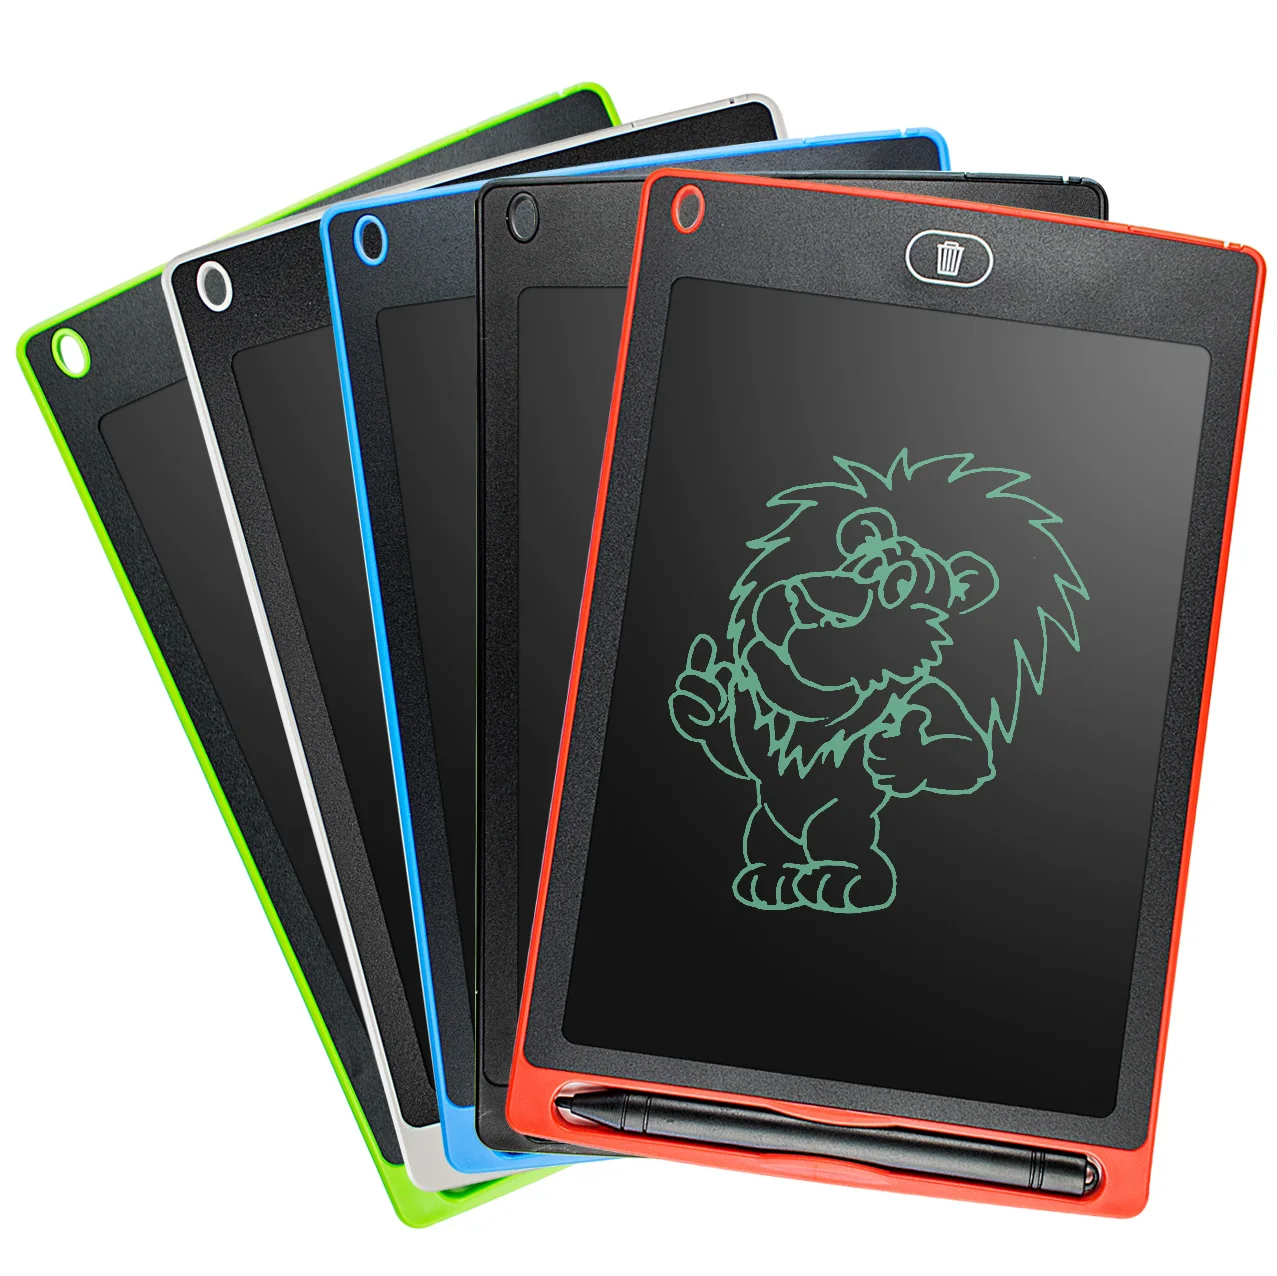 Magic Drawing Pad For Kids Memo Lcd Tablet Rewritten Board Writing Pads